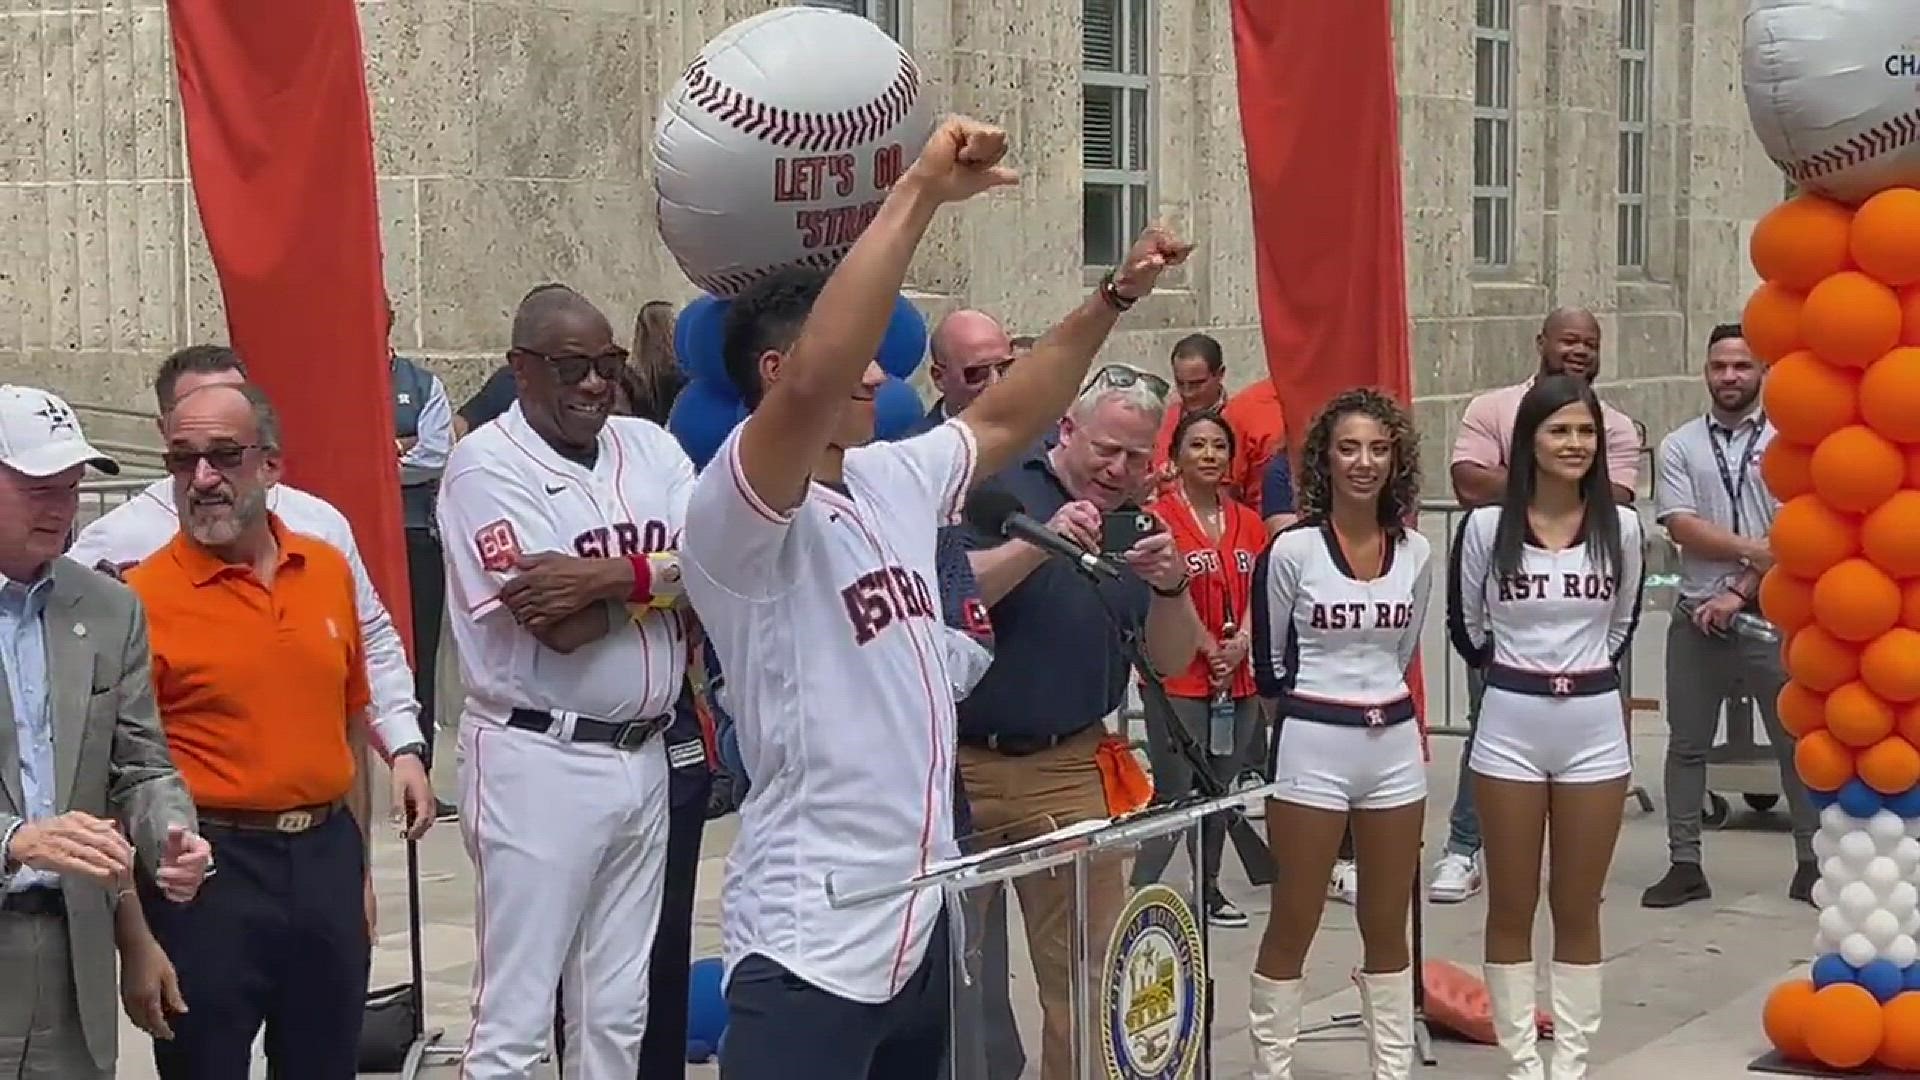 The crowd gathered in front of City Hall chanted "Pena, Pena" when the rookie shortstop took the stage. He told them, "H-Town country, let's ride!"